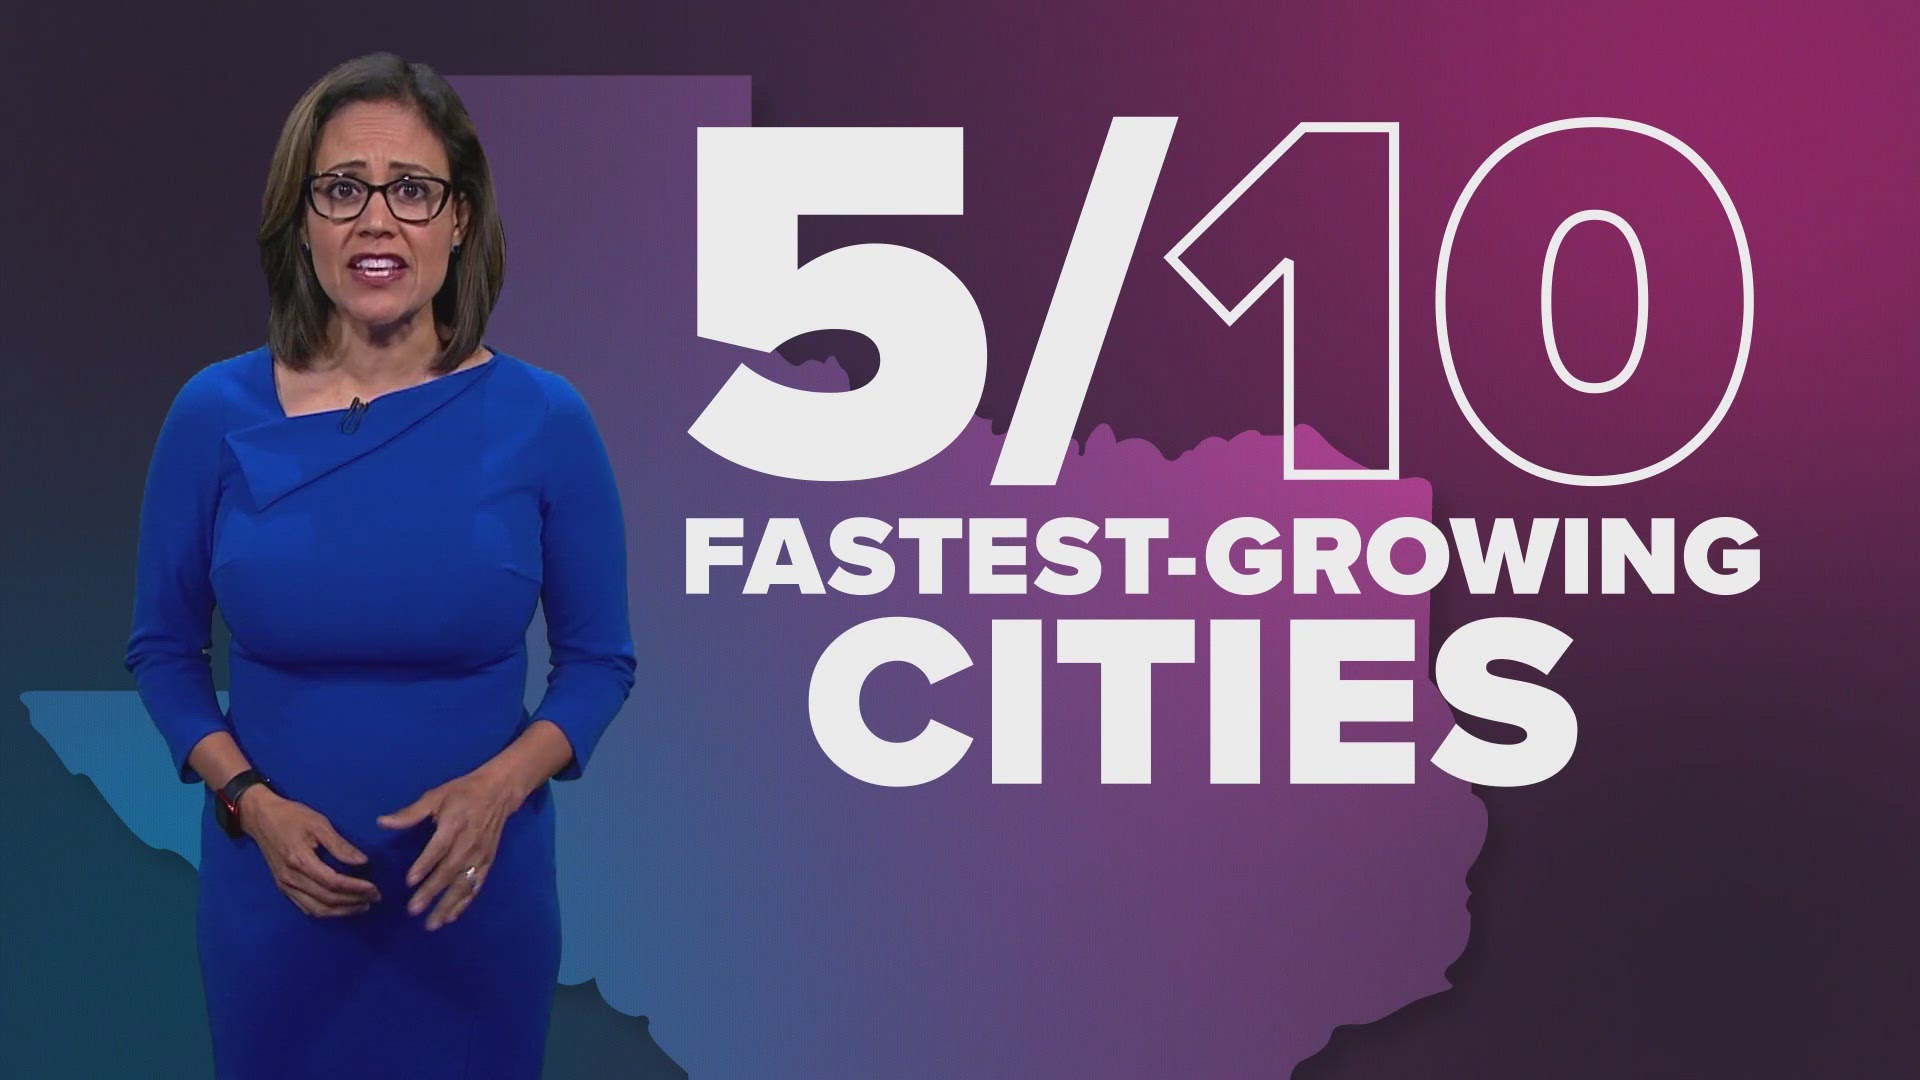 Celina topped the list at No. 1 with 26% population growth.